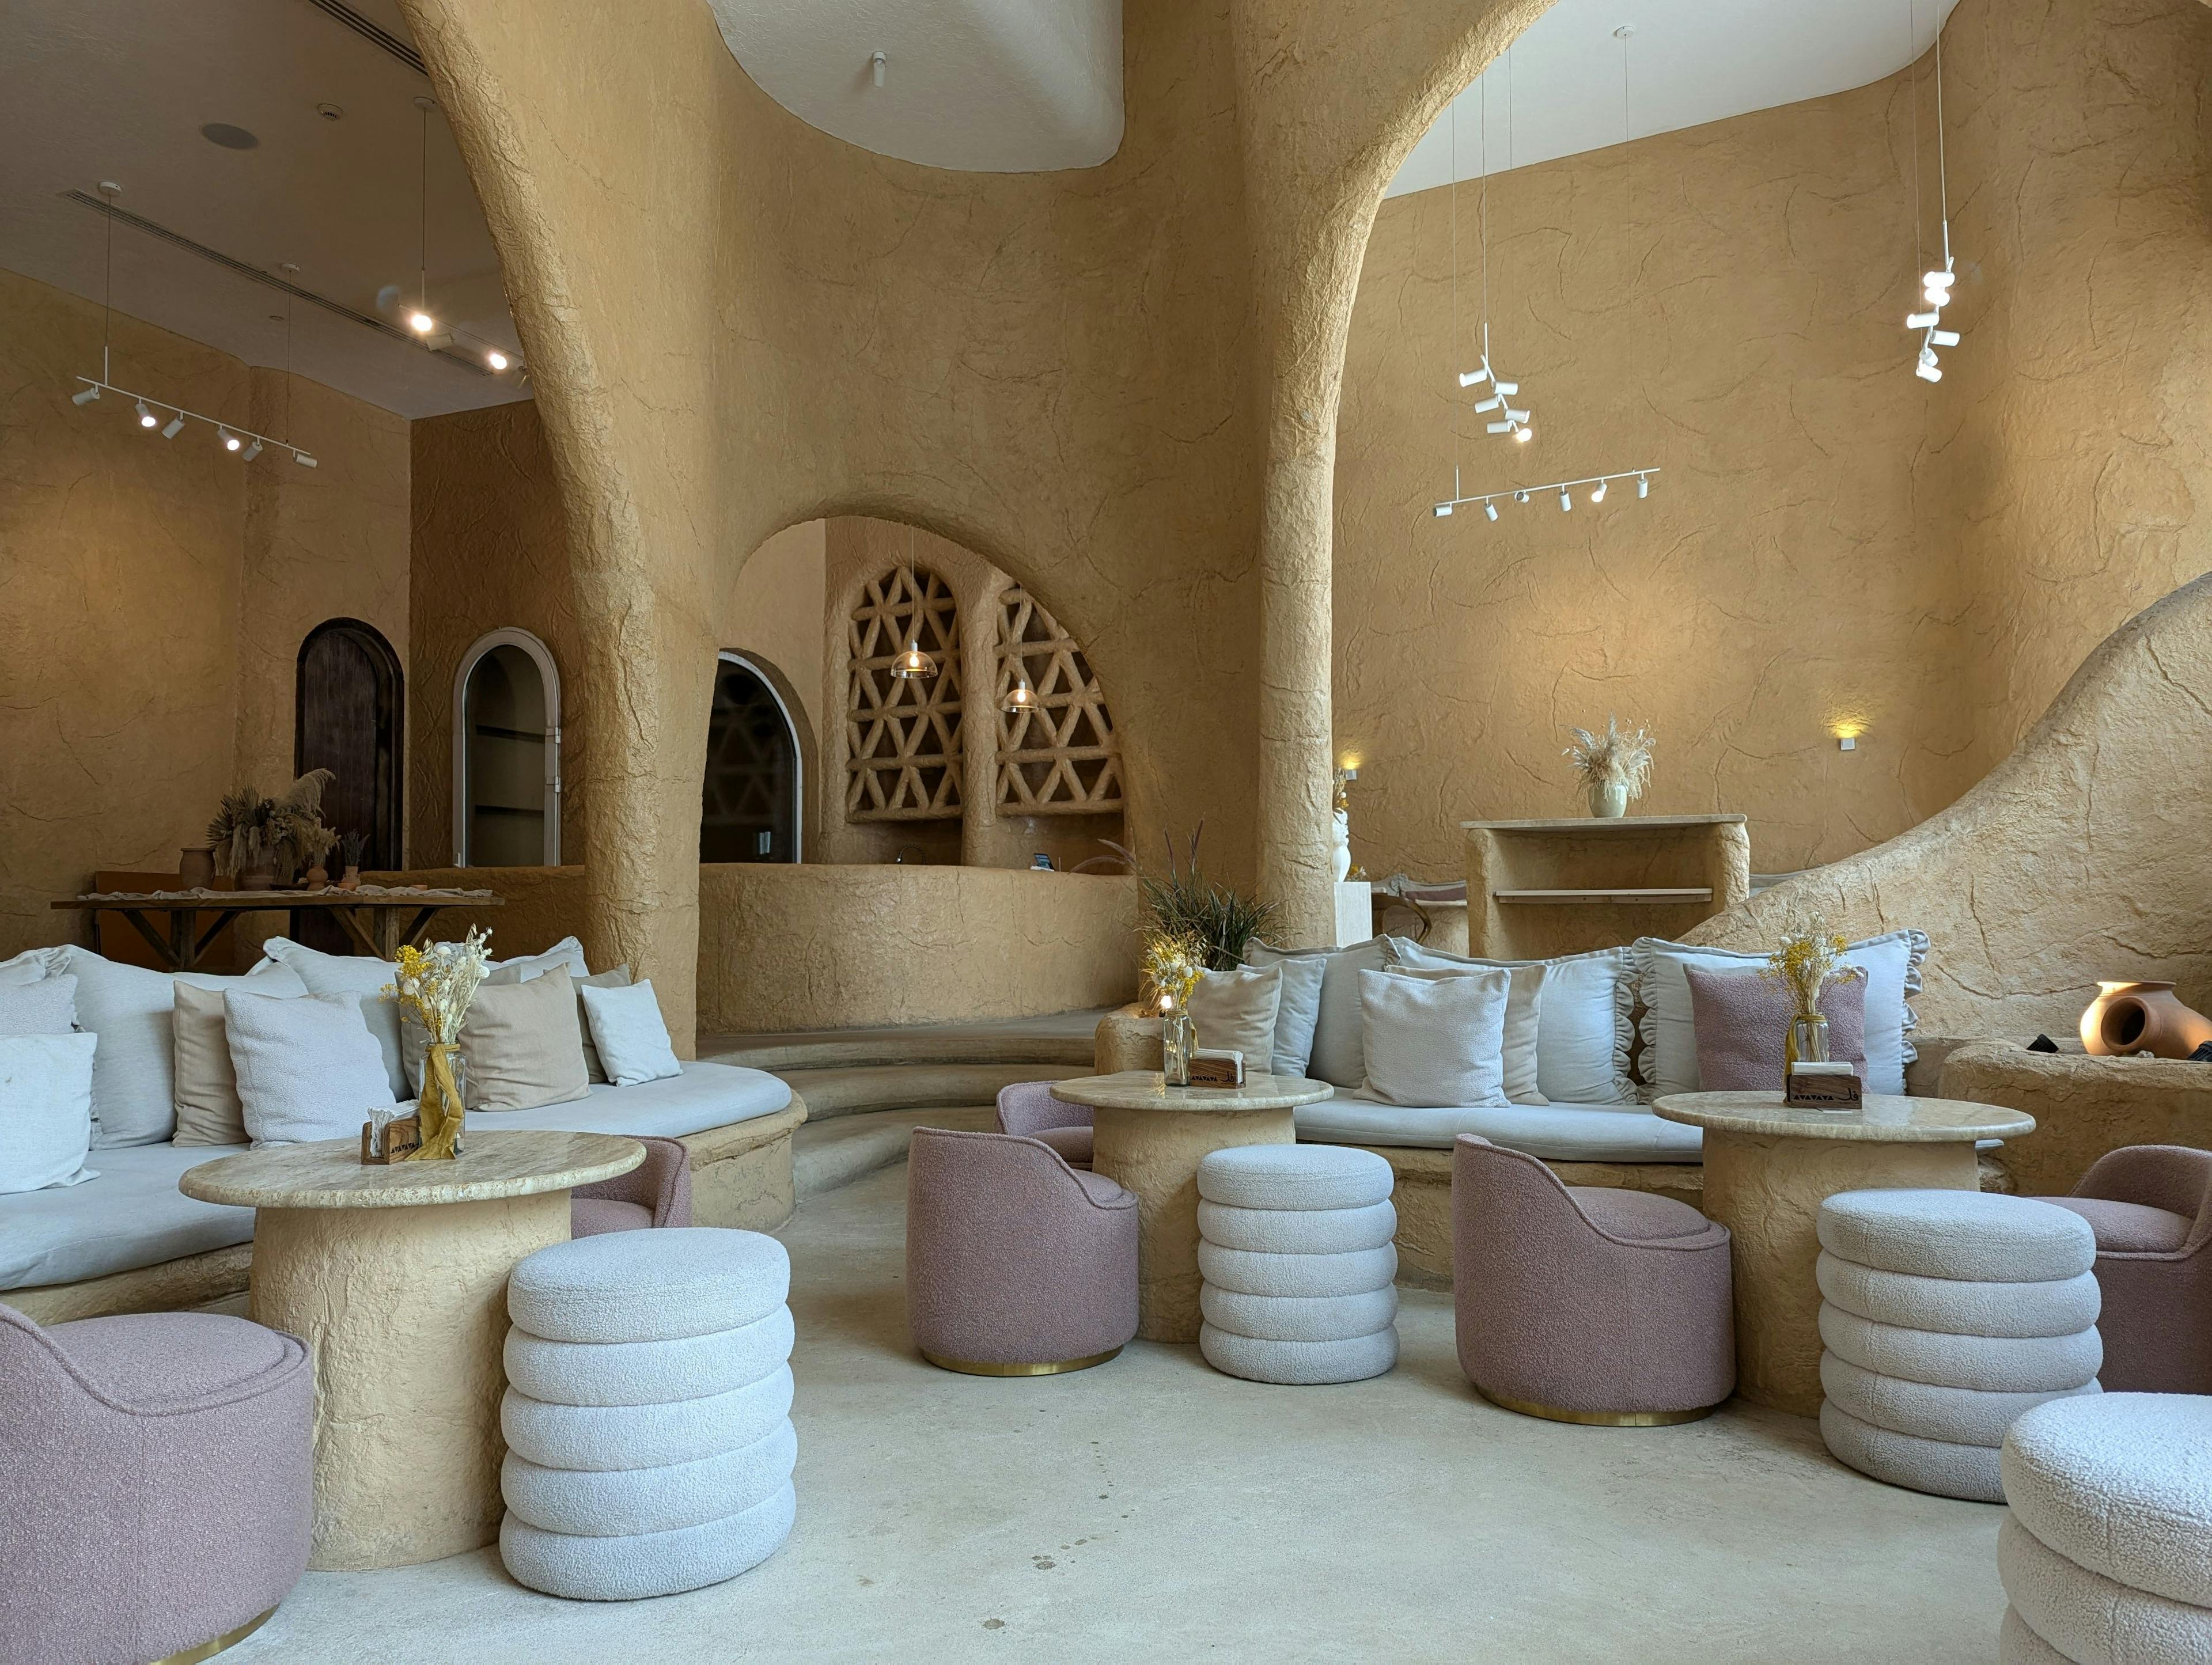 THE MOST INSTAGRAMMABLE CAFES IN ABU DHABI